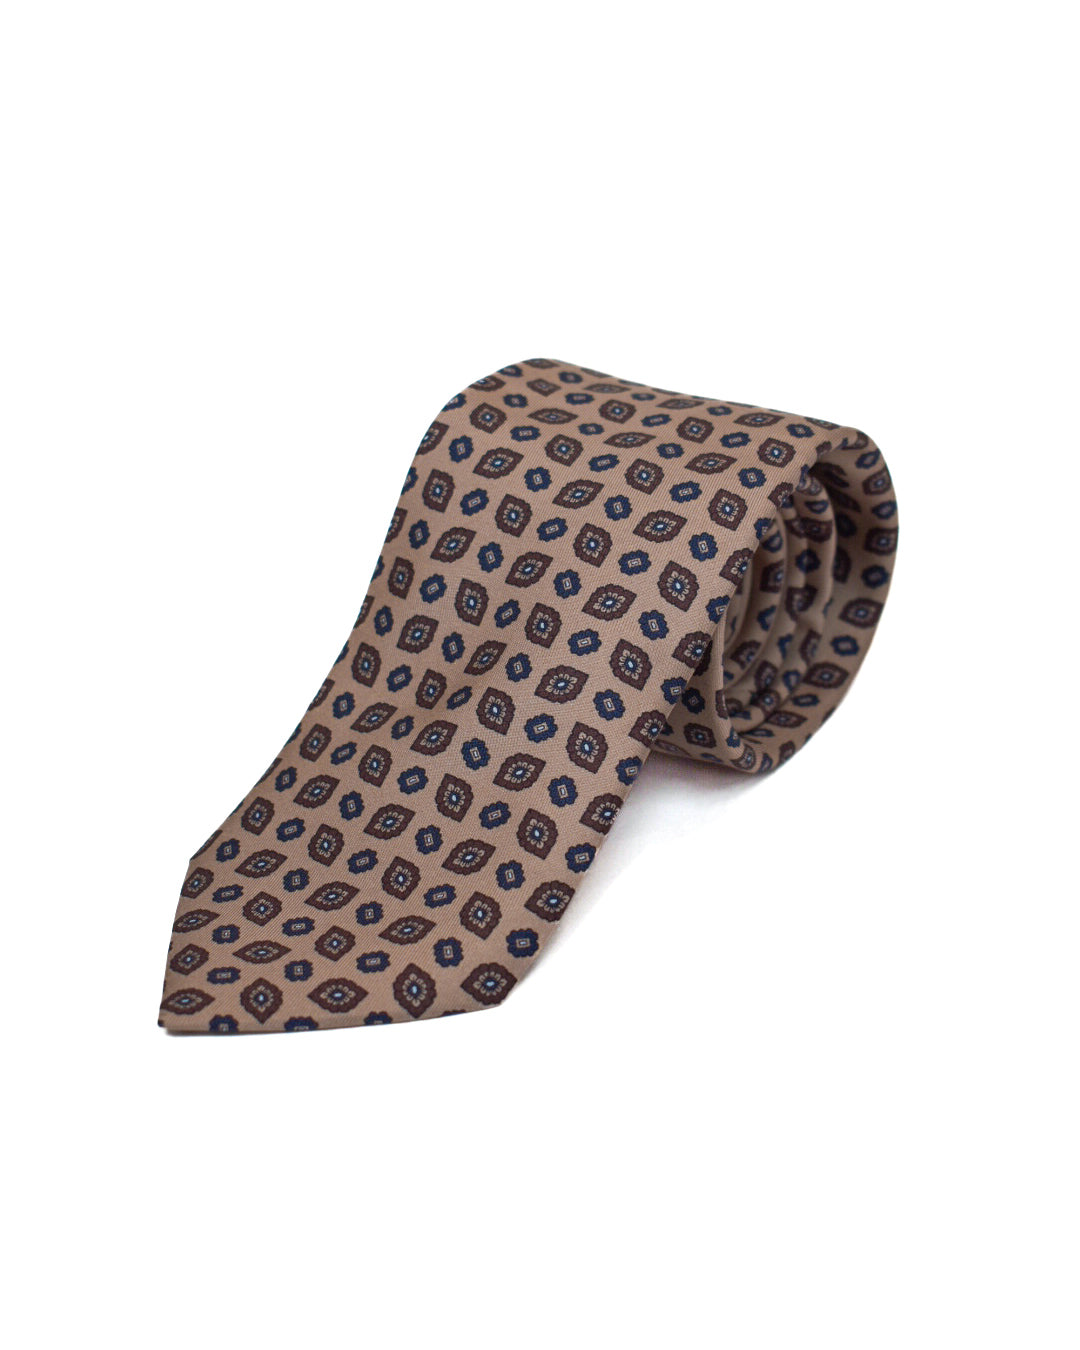 Liam John Tan with Brown and Blue Mosaic Tie